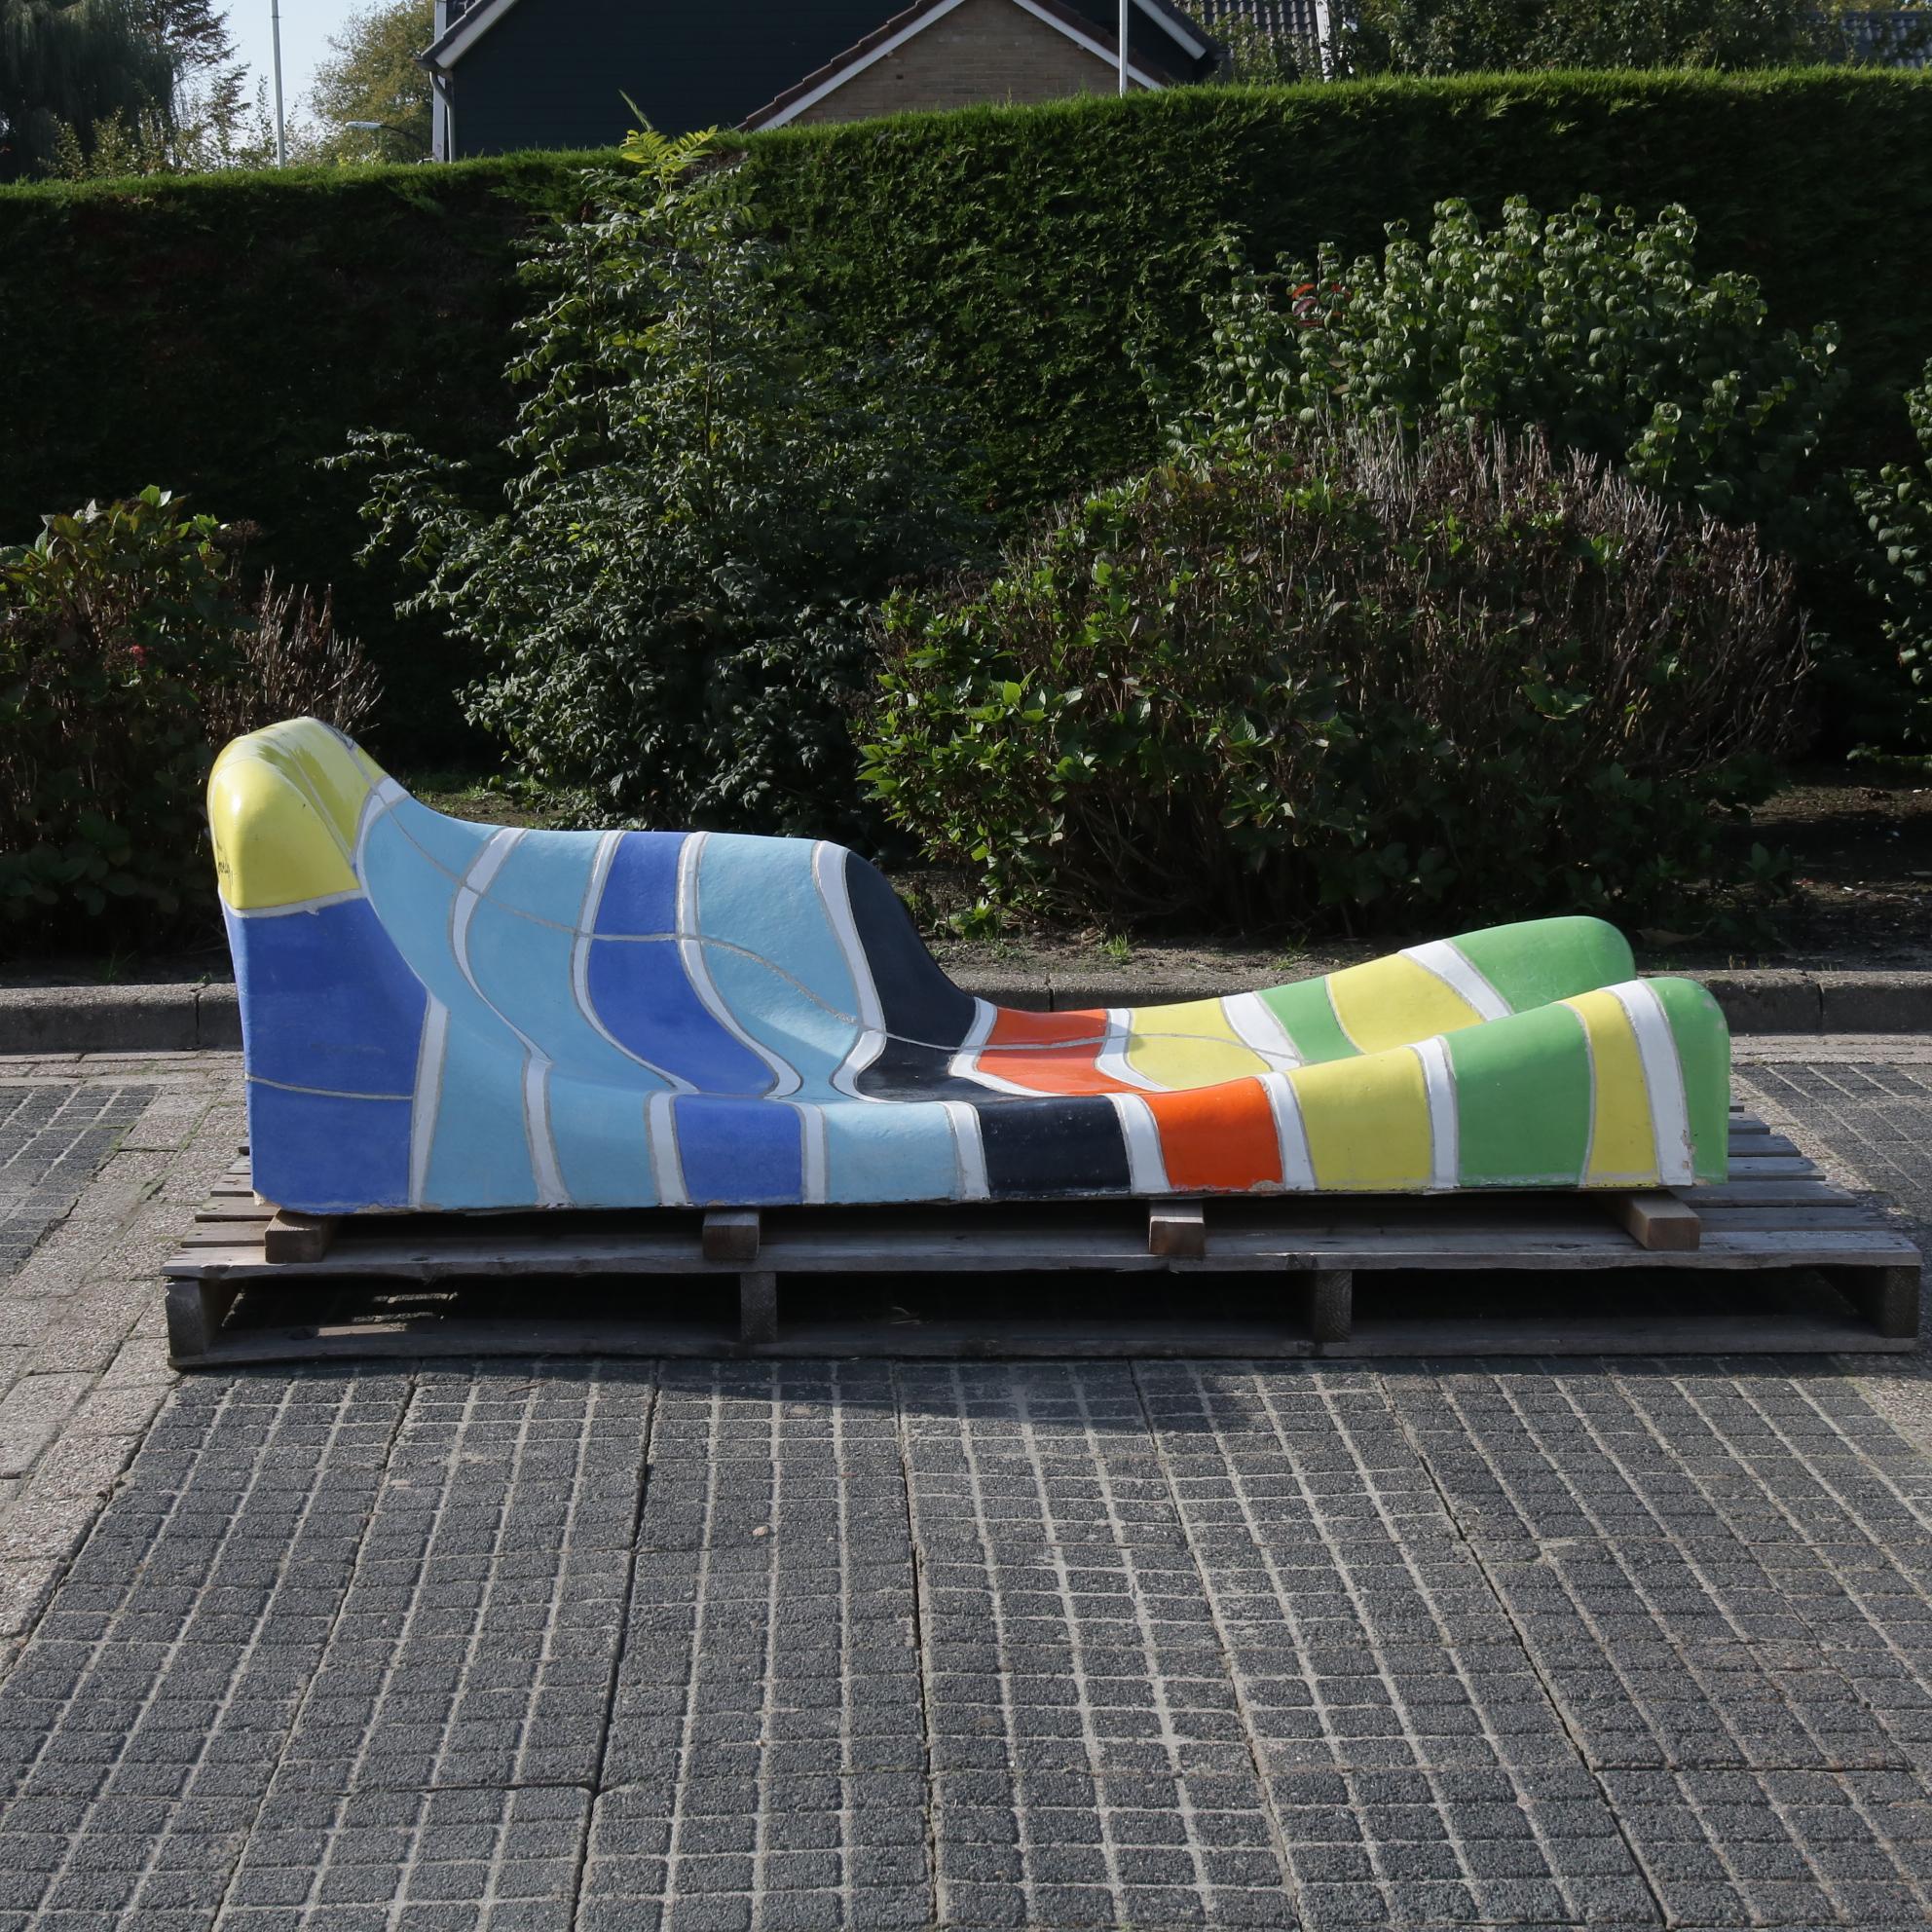 An eye-catching ceramics daybed, designed by Jan Snoeck from the the MS Volendam (HAL) in The Hague, the Netherlands in 1991 (signed).

This is one of the ceramic beds that decorated the swimming deck of the MS Volendam (we have photos available), a